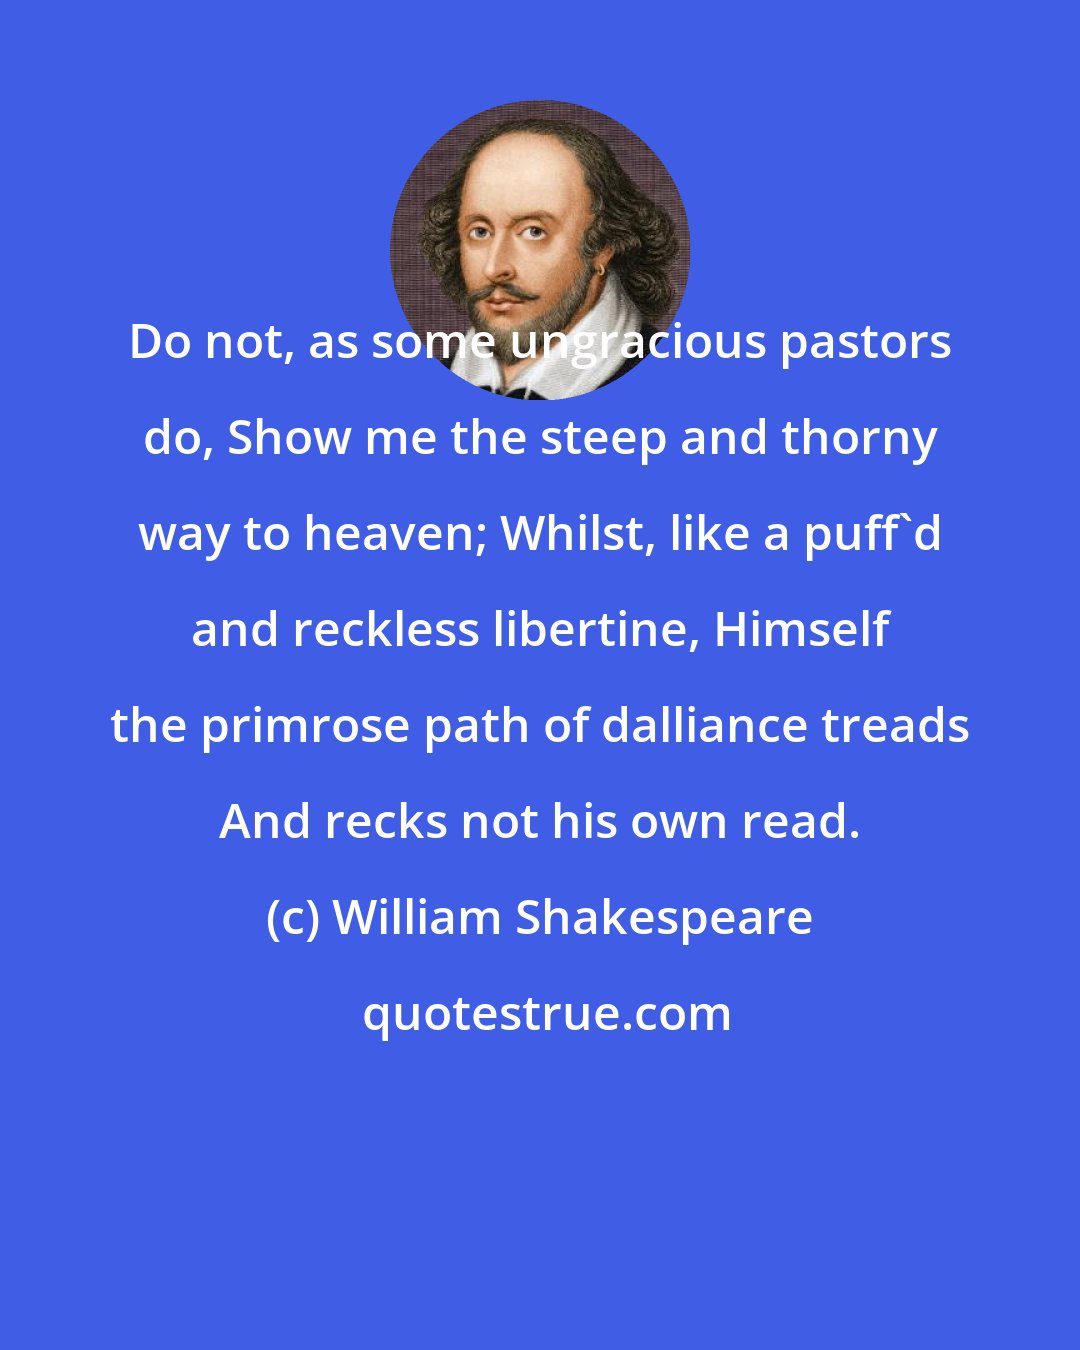 William Shakespeare: Do not, as some ungracious pastors do, Show me the steep and thorny way to heaven; Whilst, like a puff'd and reckless libertine, Himself the primrose path of dalliance treads And recks not his own read.